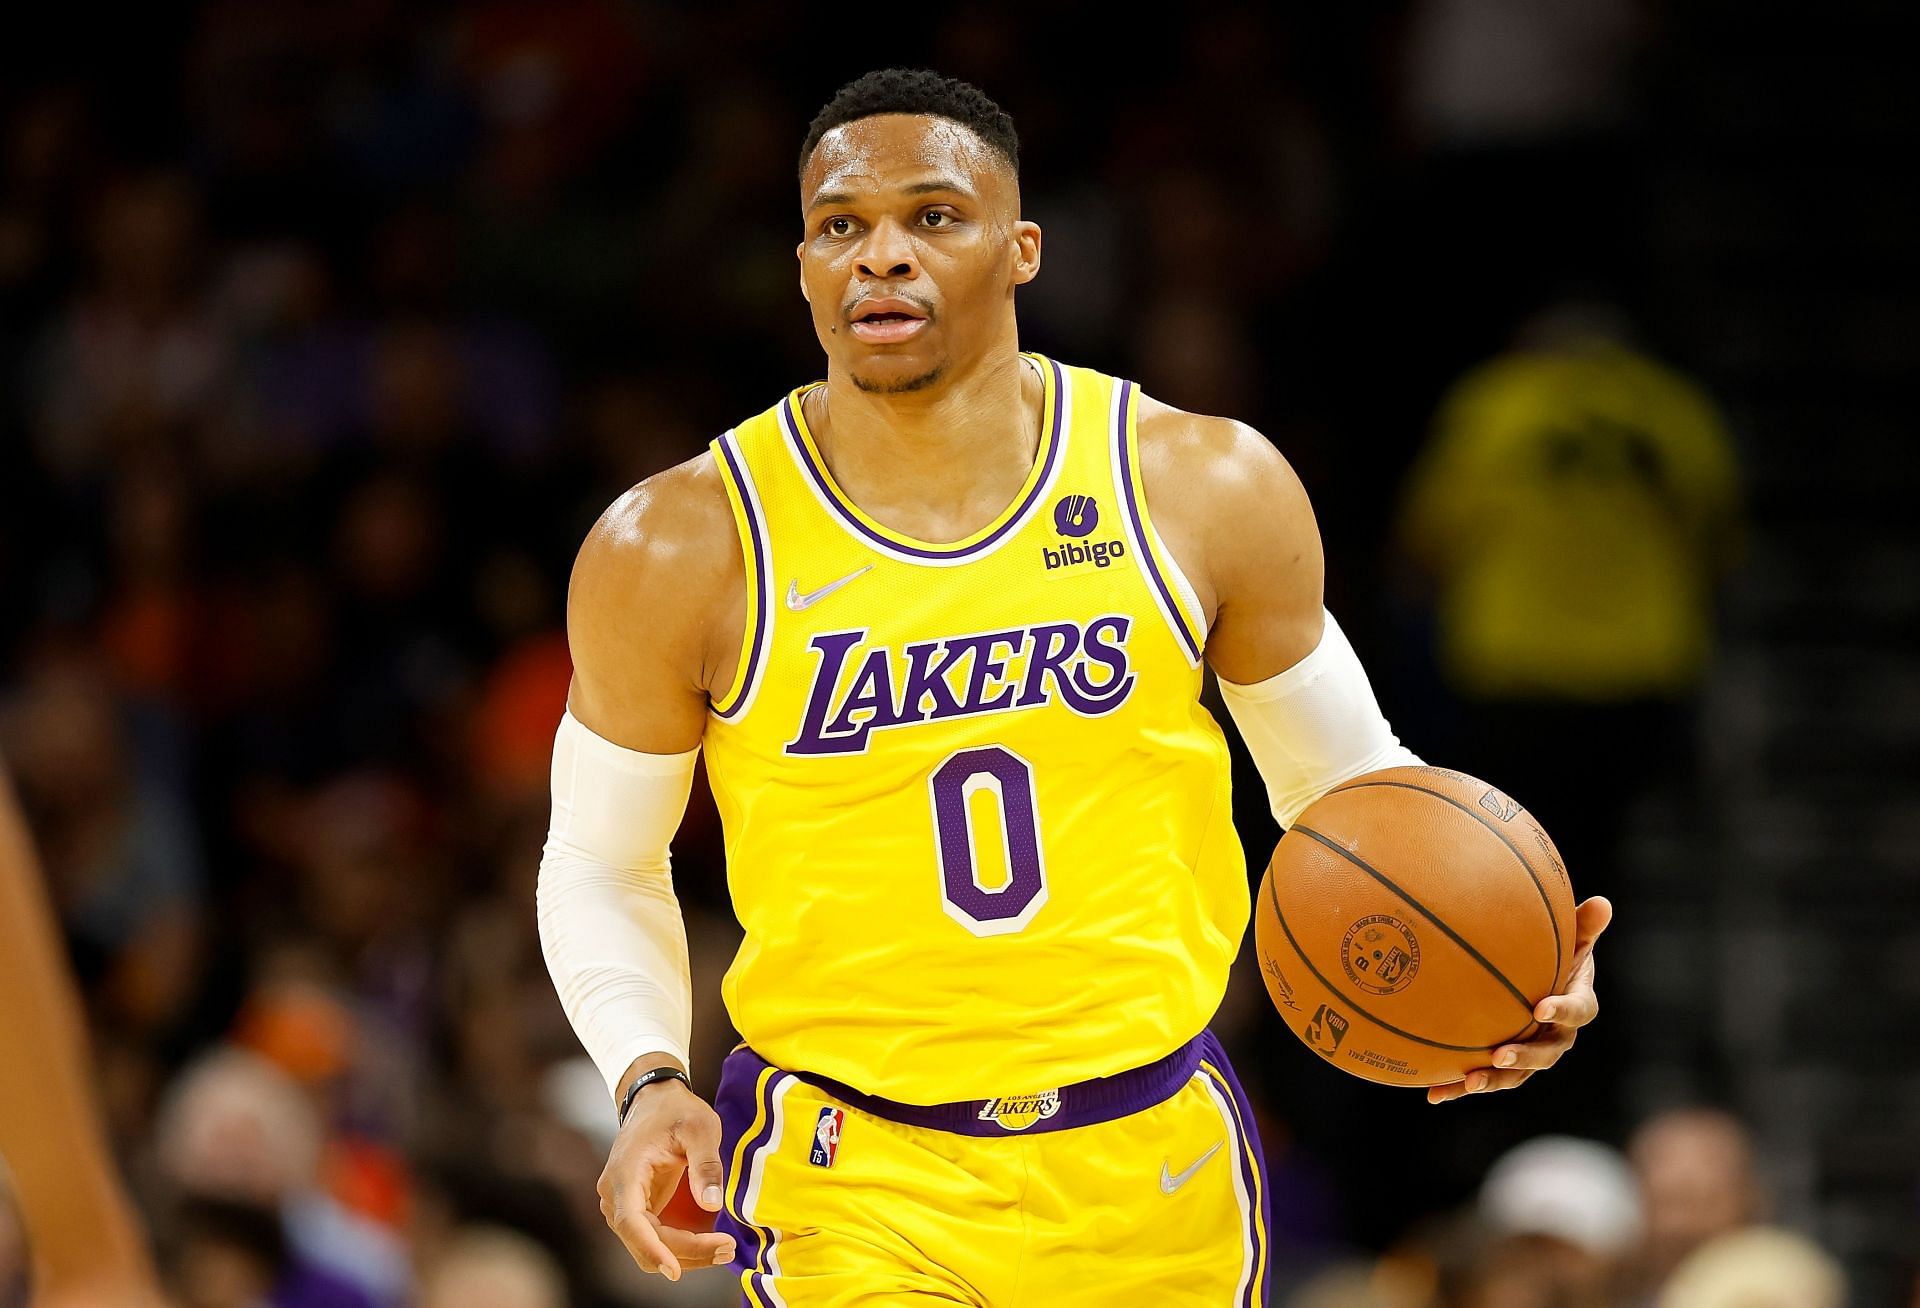 Westbrook&#039;s lackluster performances have been talked to death all season long and, with his $47 million player option due, things could turn out disastrous if he fails to peform this season.